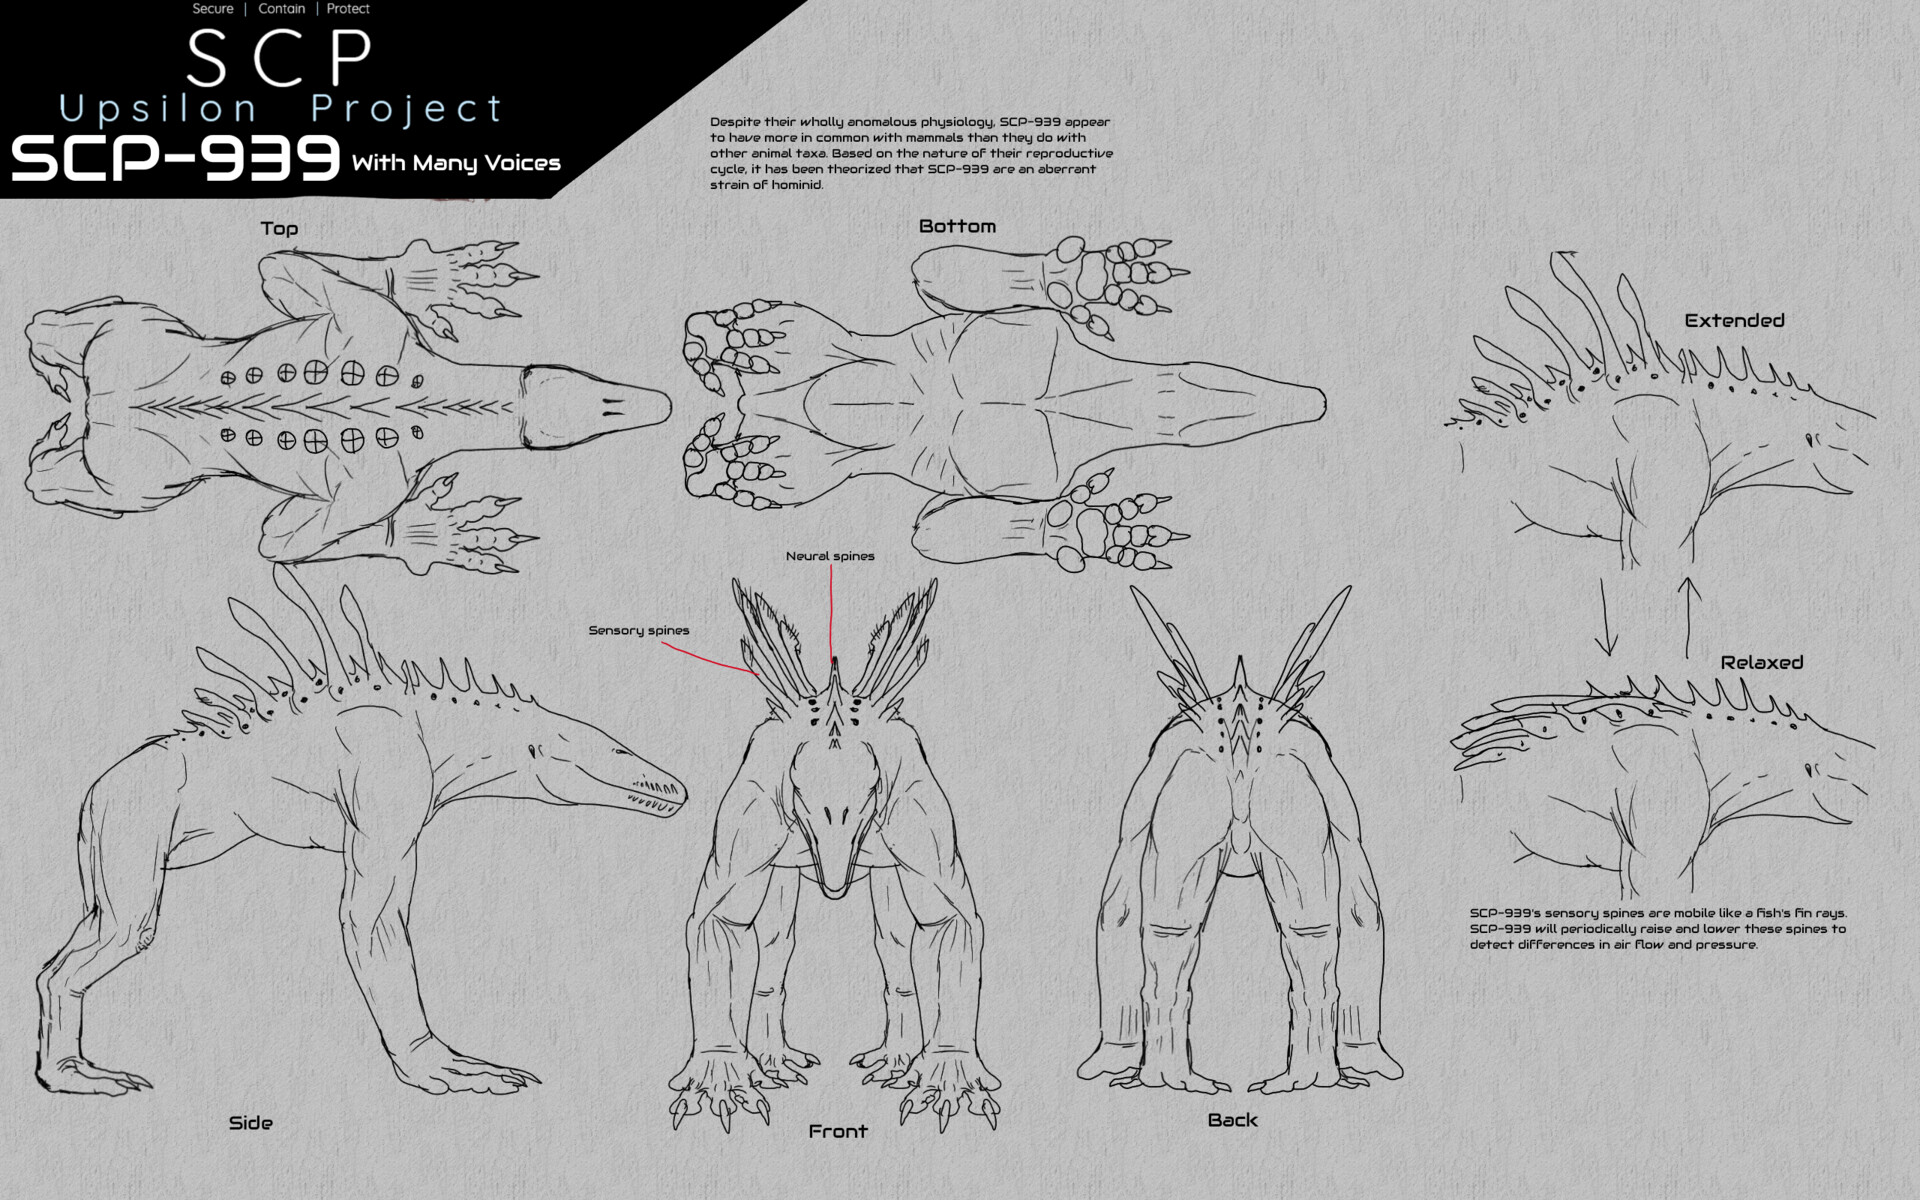 Kenneth Crooker - SCP Foundation Creature Designs